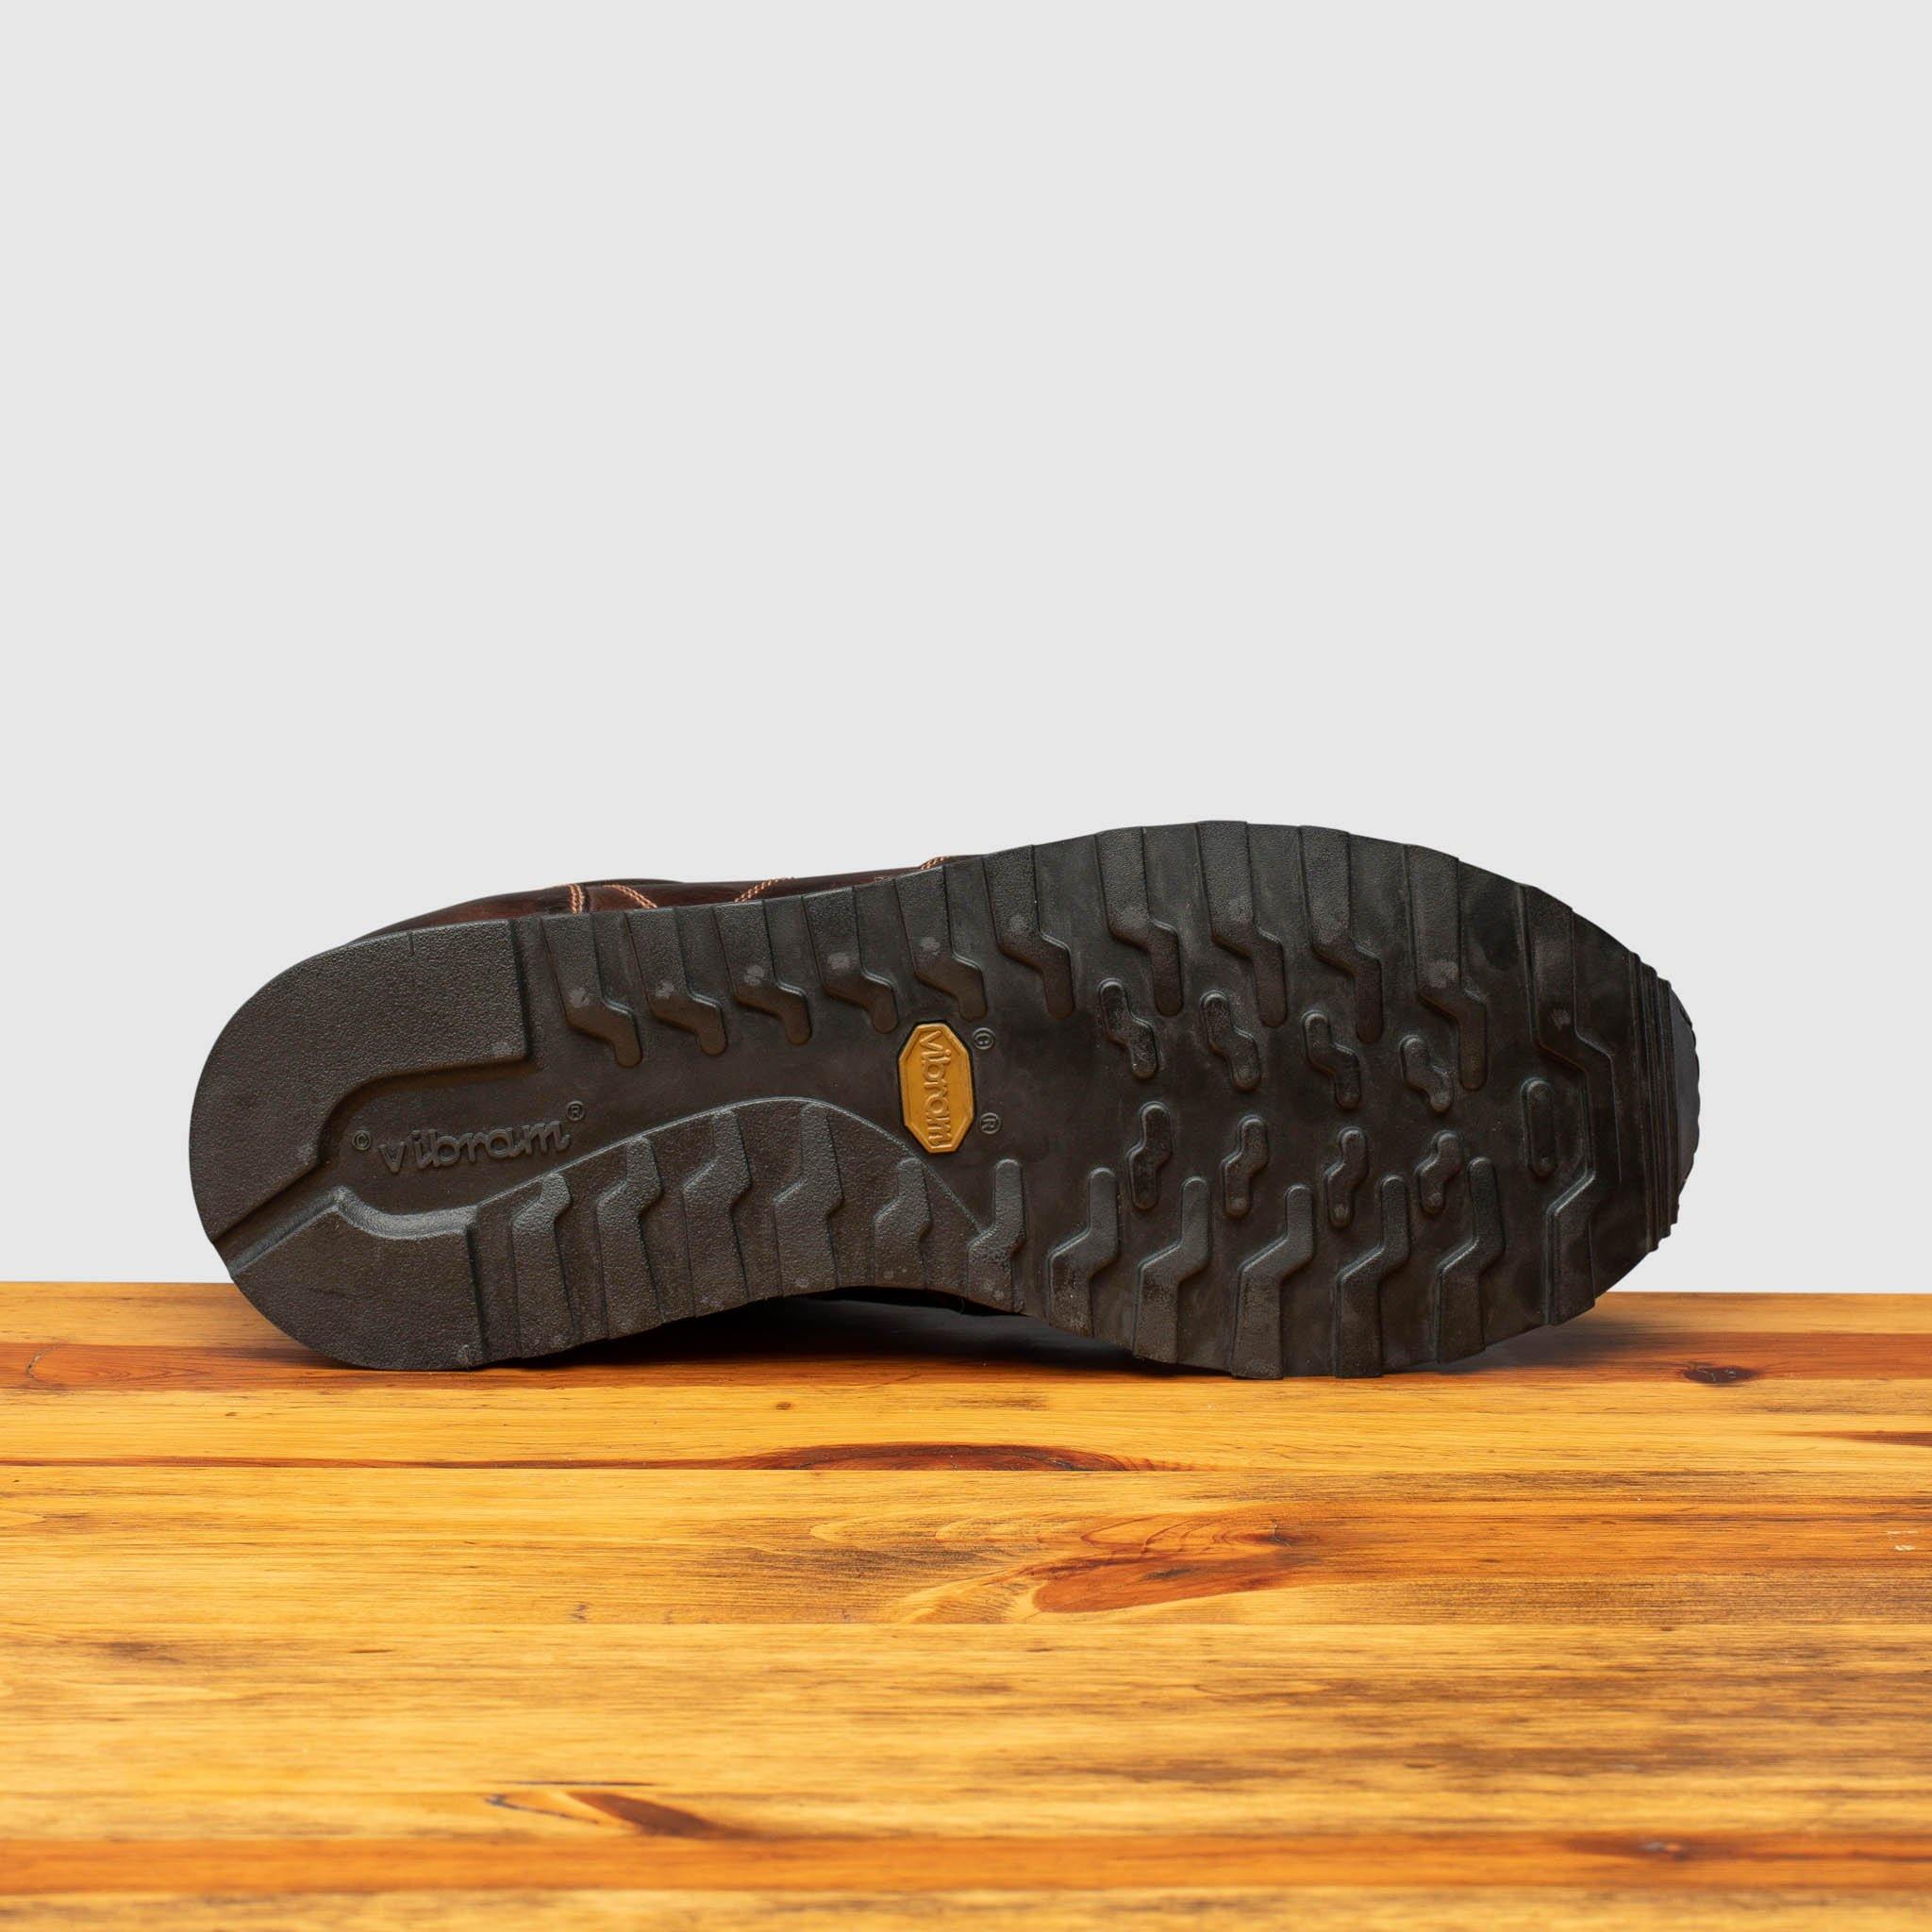 Full  Rubber Vibram outsole of H703 Calzoleria Toscana Dark Brown Sixty Seven Runner on top of a wooden table